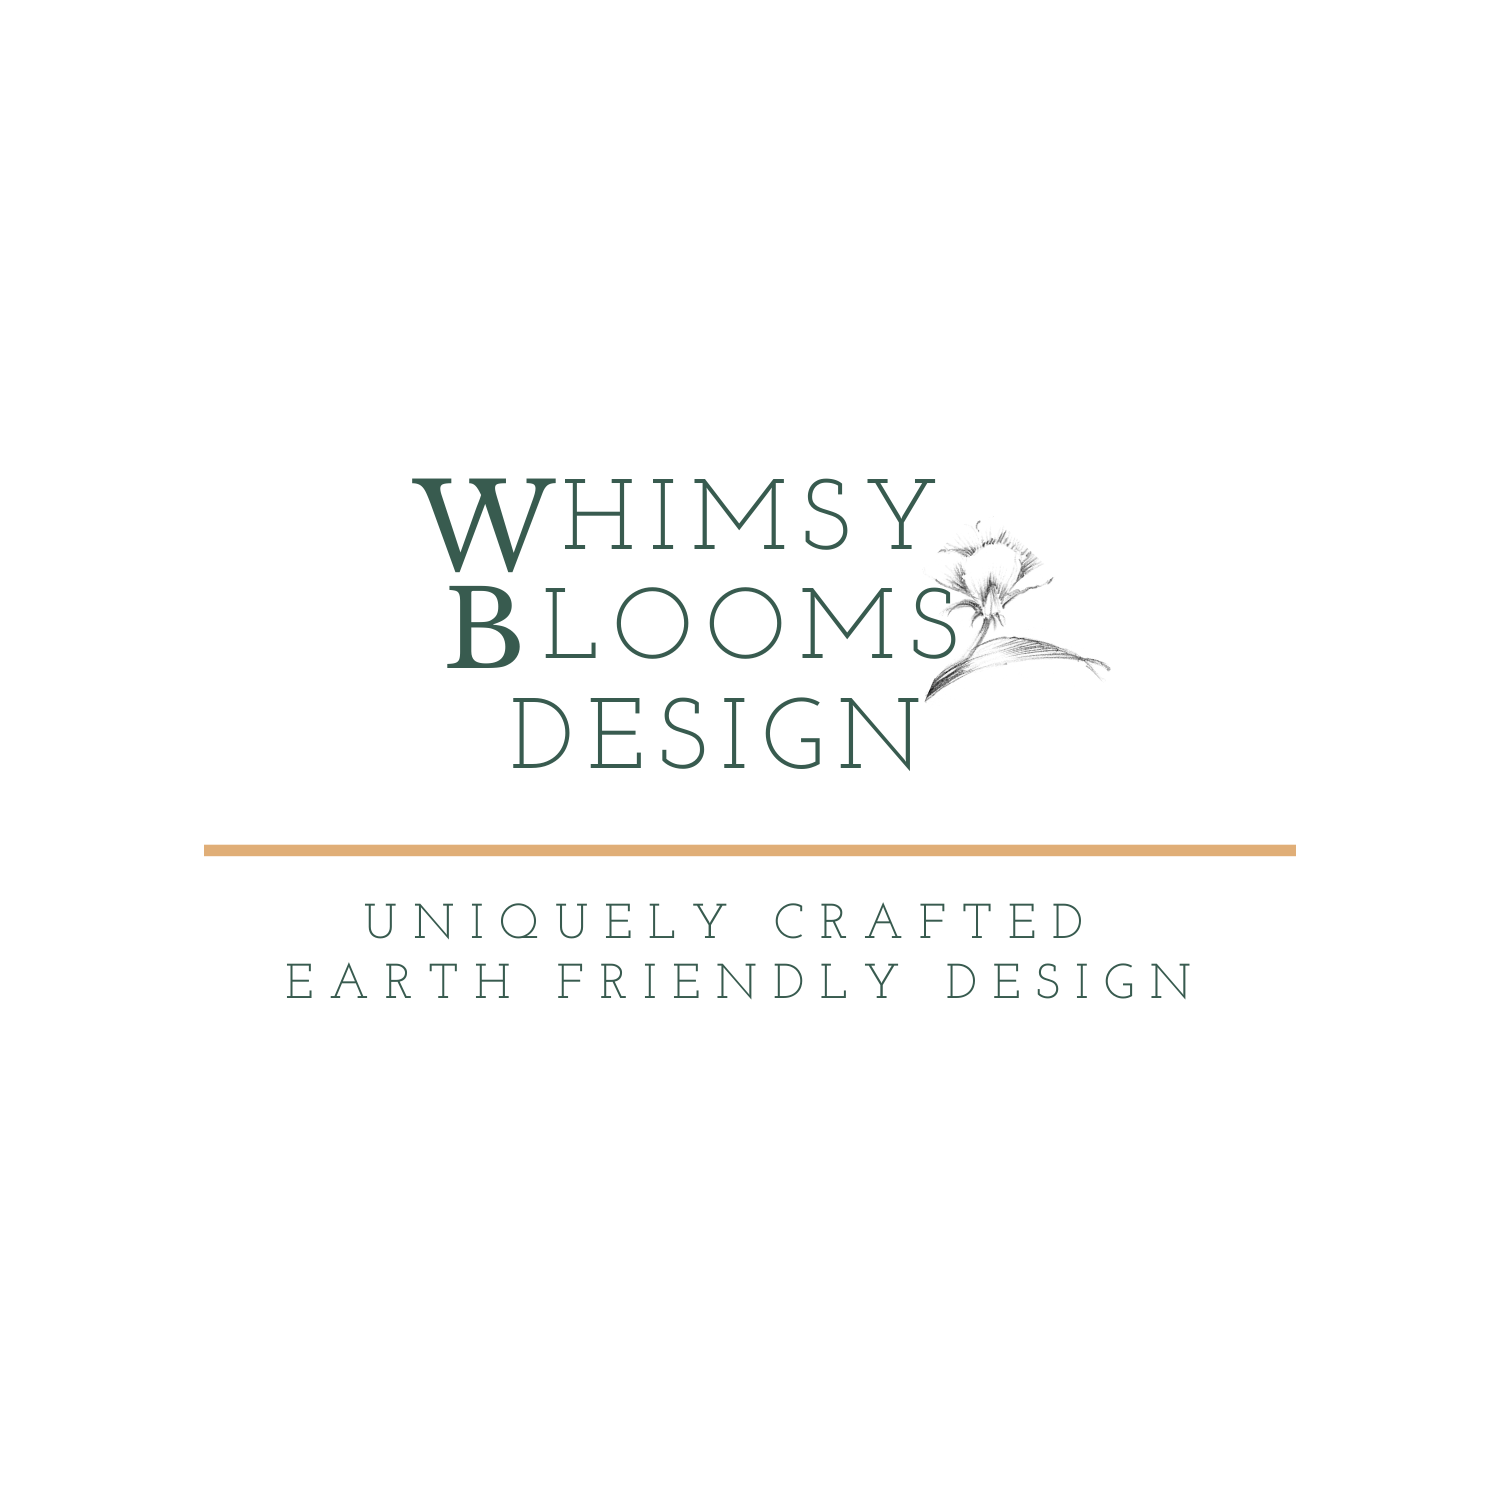 Whimsy Blooms Design